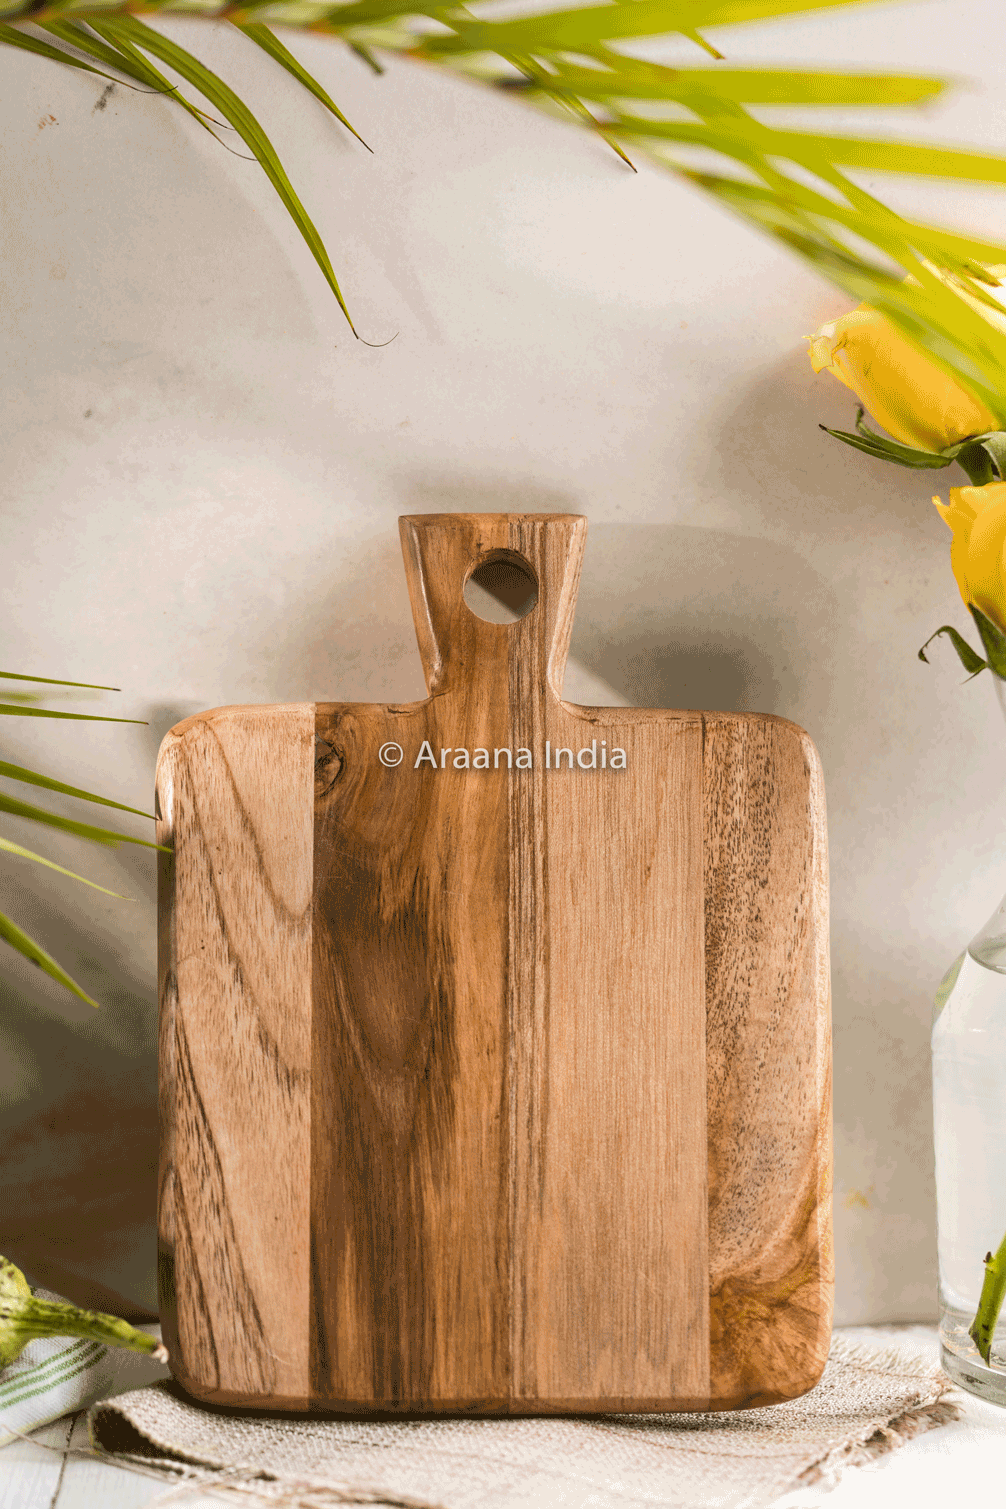 Chauras - Small classic square chopping board, a product by Araana Homes